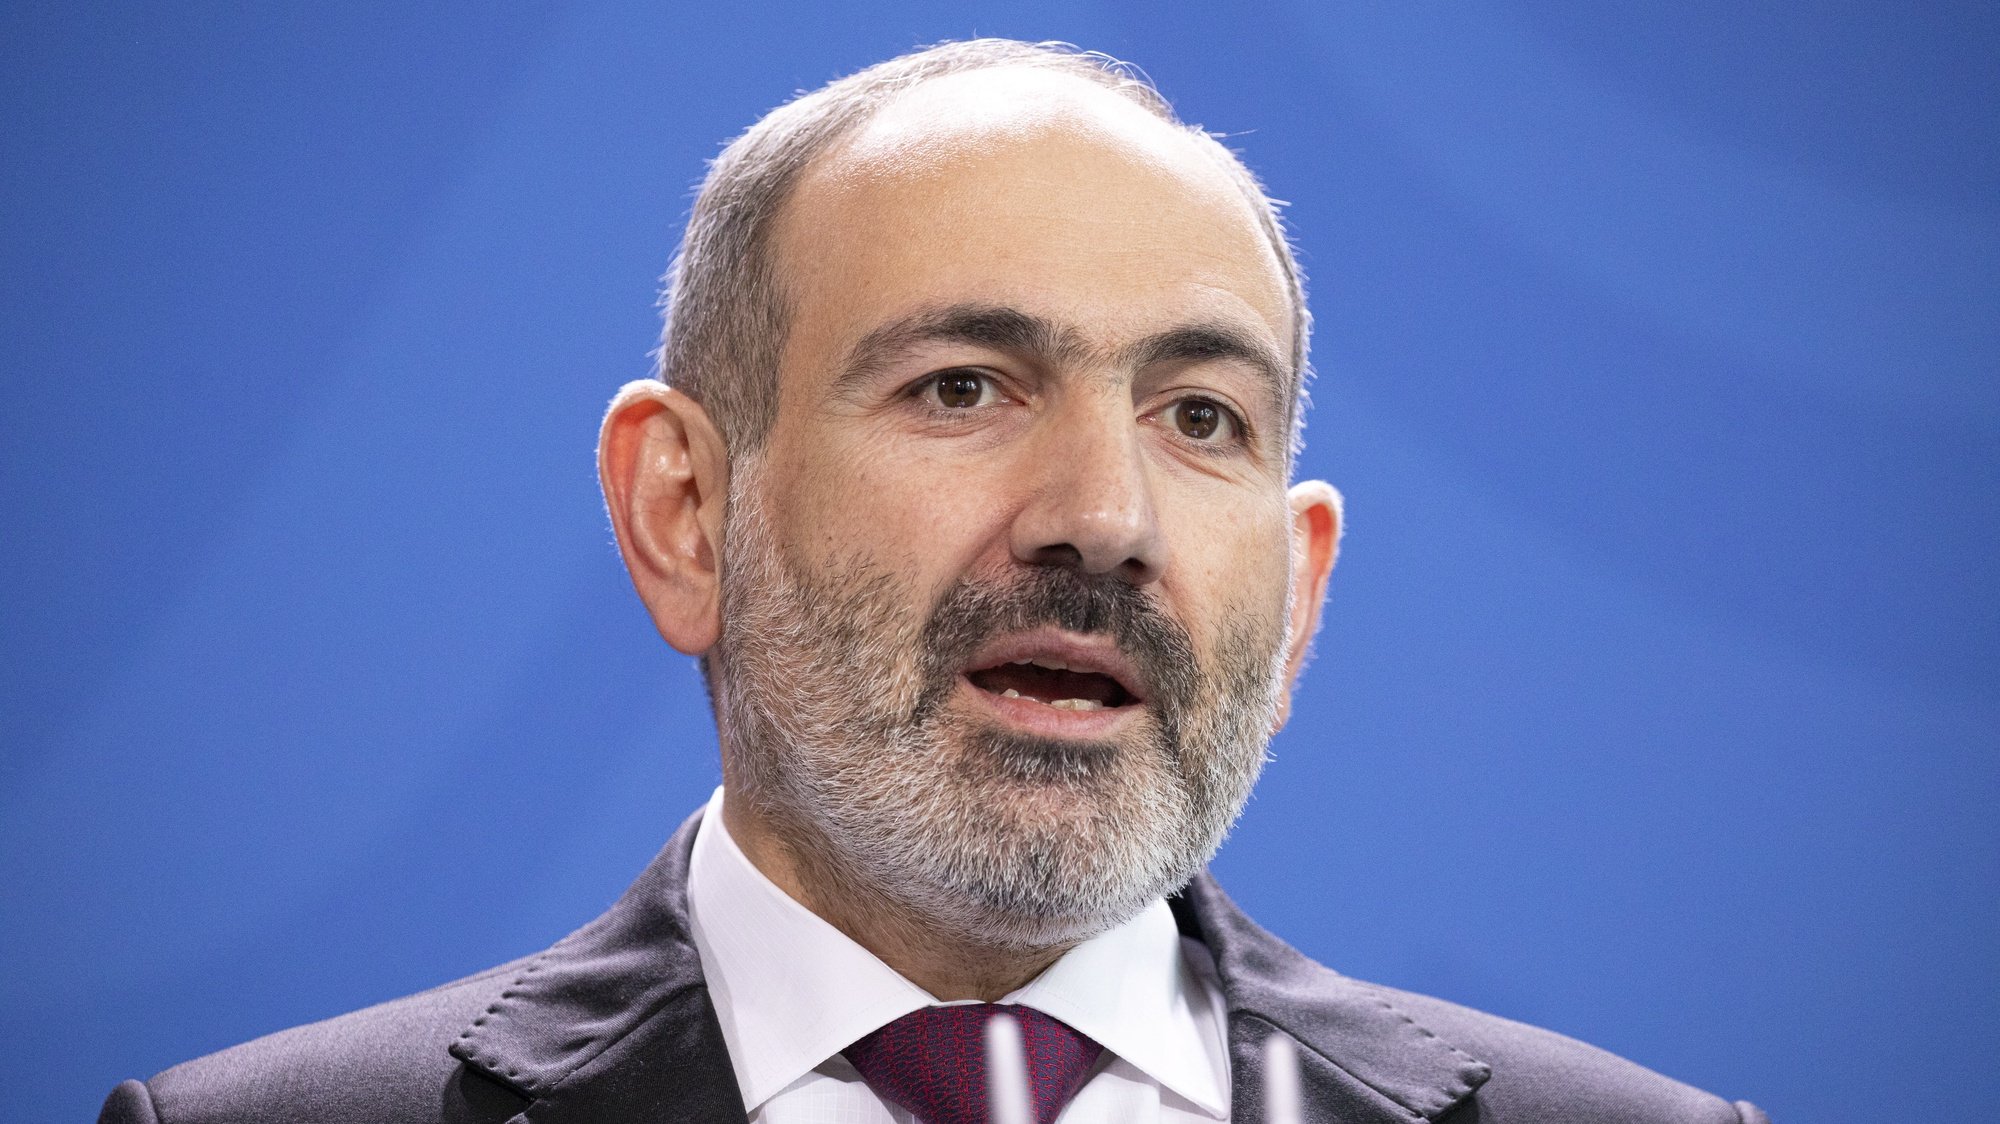 epa09103232 (FILE) - Prime Minister of Armenia Nikol Pashinyan delivers a statement prior to a meeting with German Chancellor Merkel (not pictured) at the Chancellery in Berlin, Germany, 13 February 2020 (Reissued 28 March 2021). Armenian Prime Minister Pashinyan announced on 28 March during a visit to the Armavir region, that he would resign from his position in April ahead of early parliamentary elections.  EPA/OMER MESSINGER *** Local Caption *** 55871945